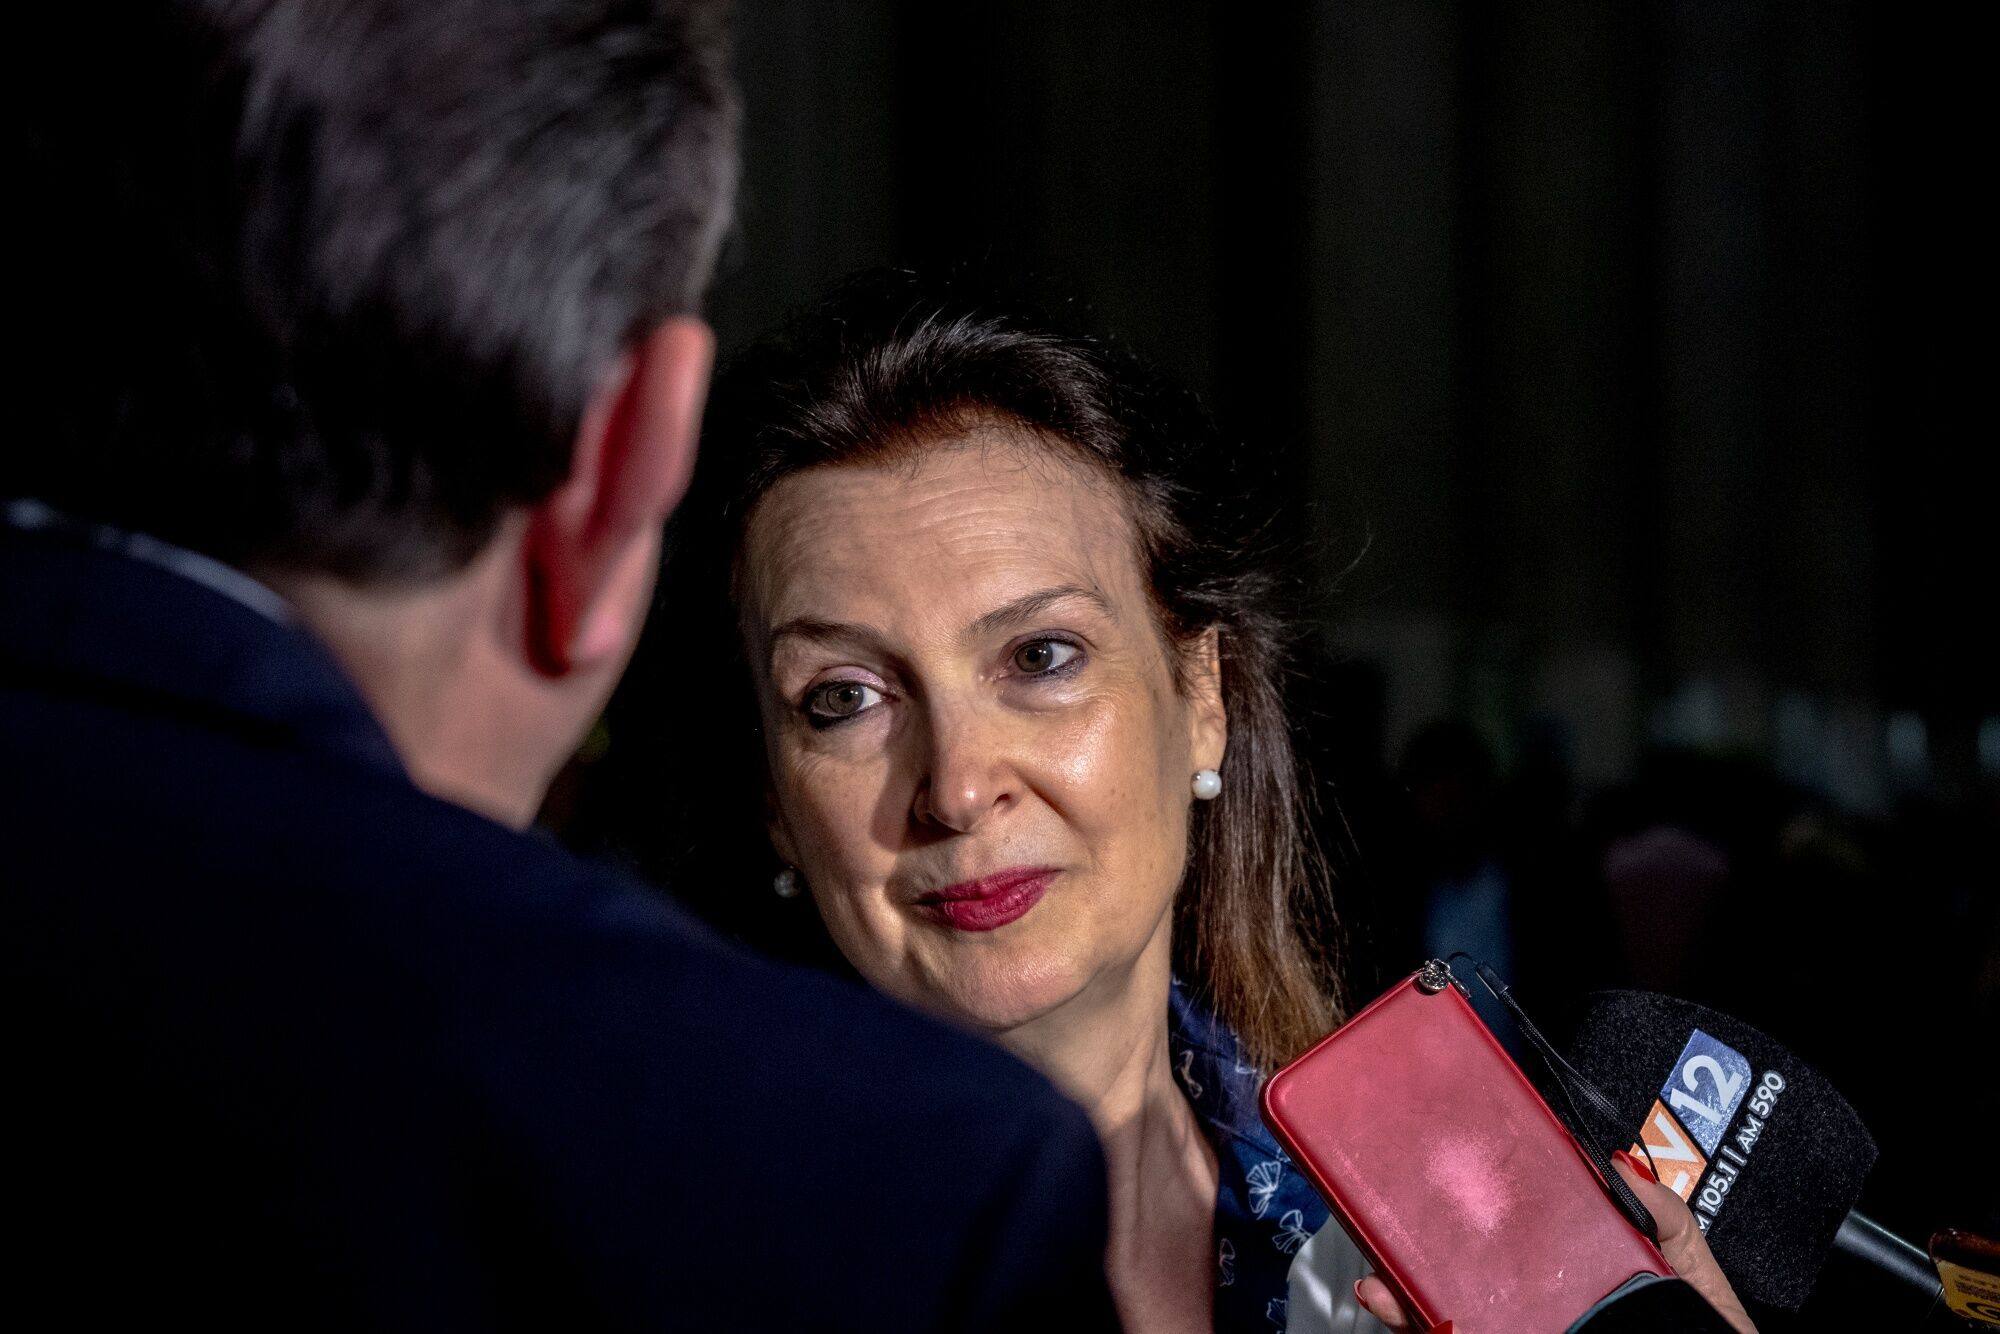 Argentine Foreign Minister Diana Mondino has said her country prefers to work with liberal democracies like the US. Photo: Bloomberg